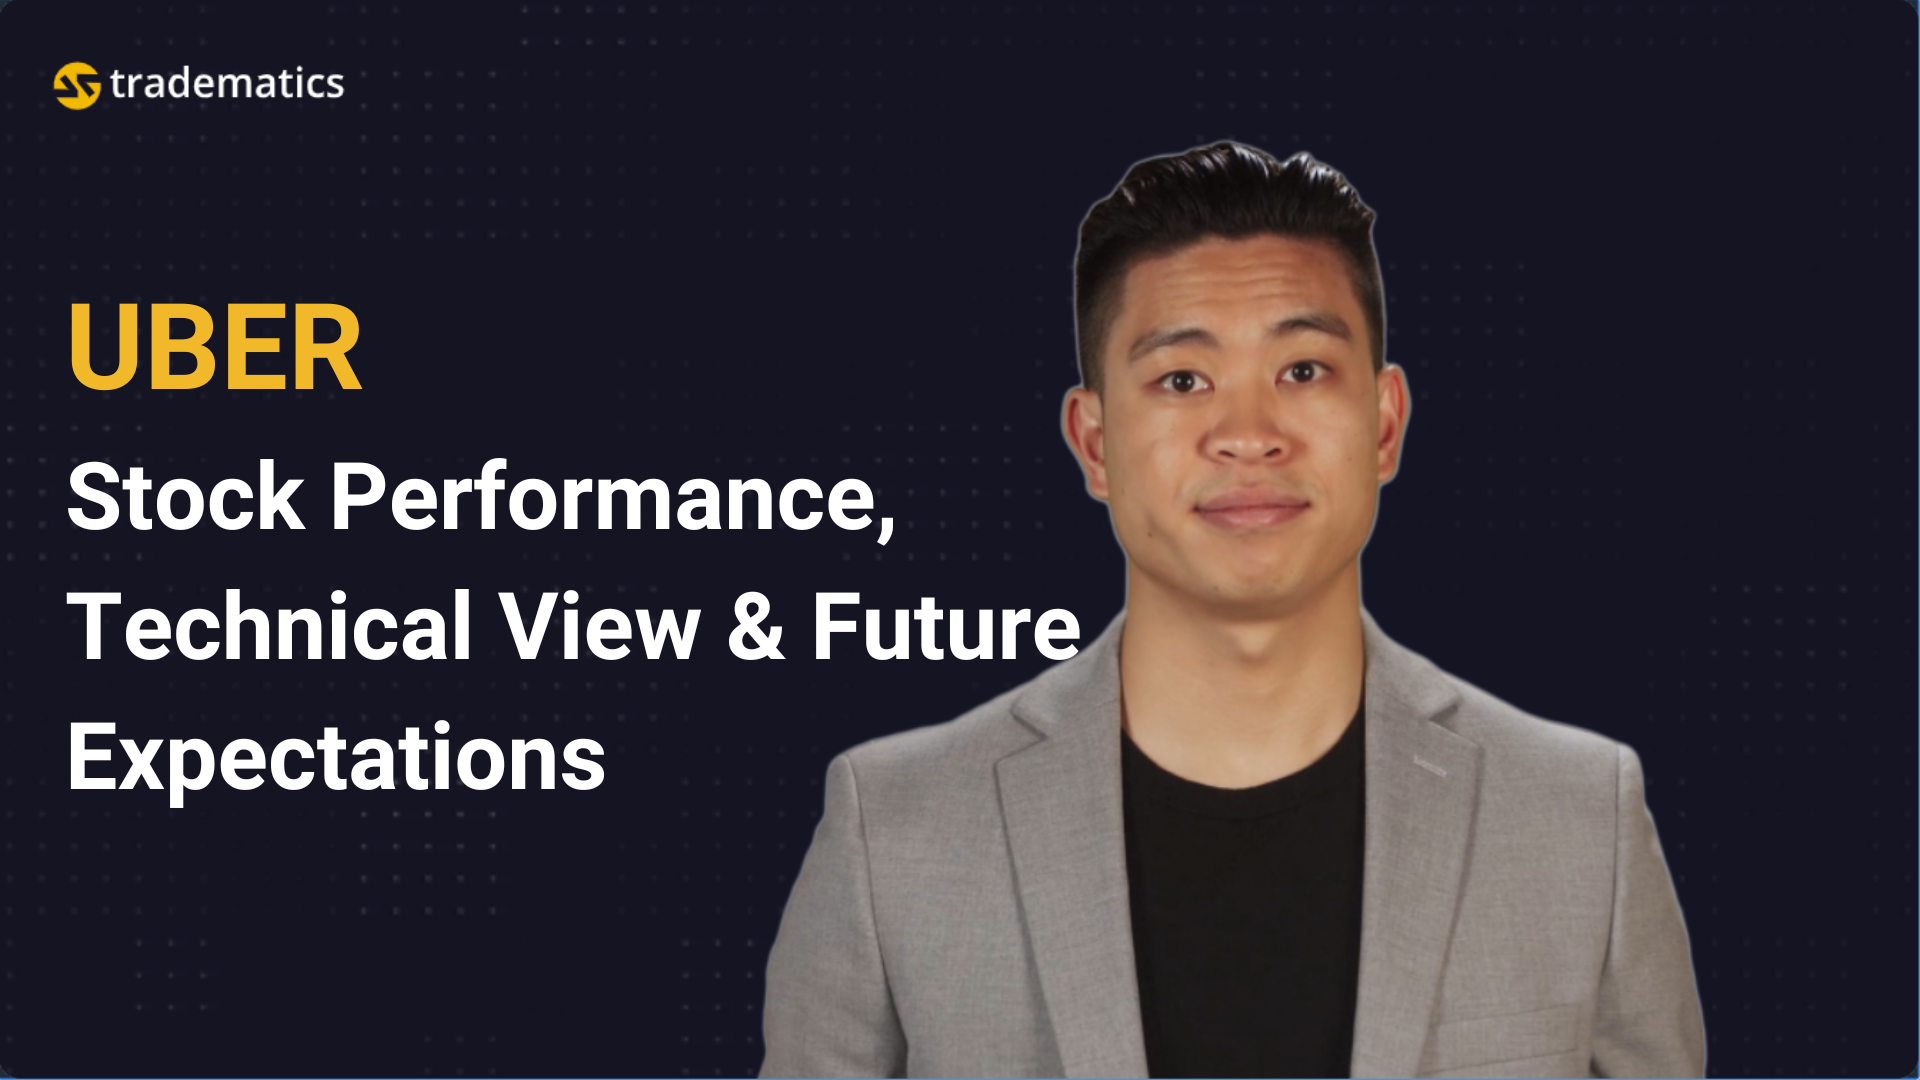 Tradematics | #8 UBER | Stock Performance, Technical View & Future Expectations